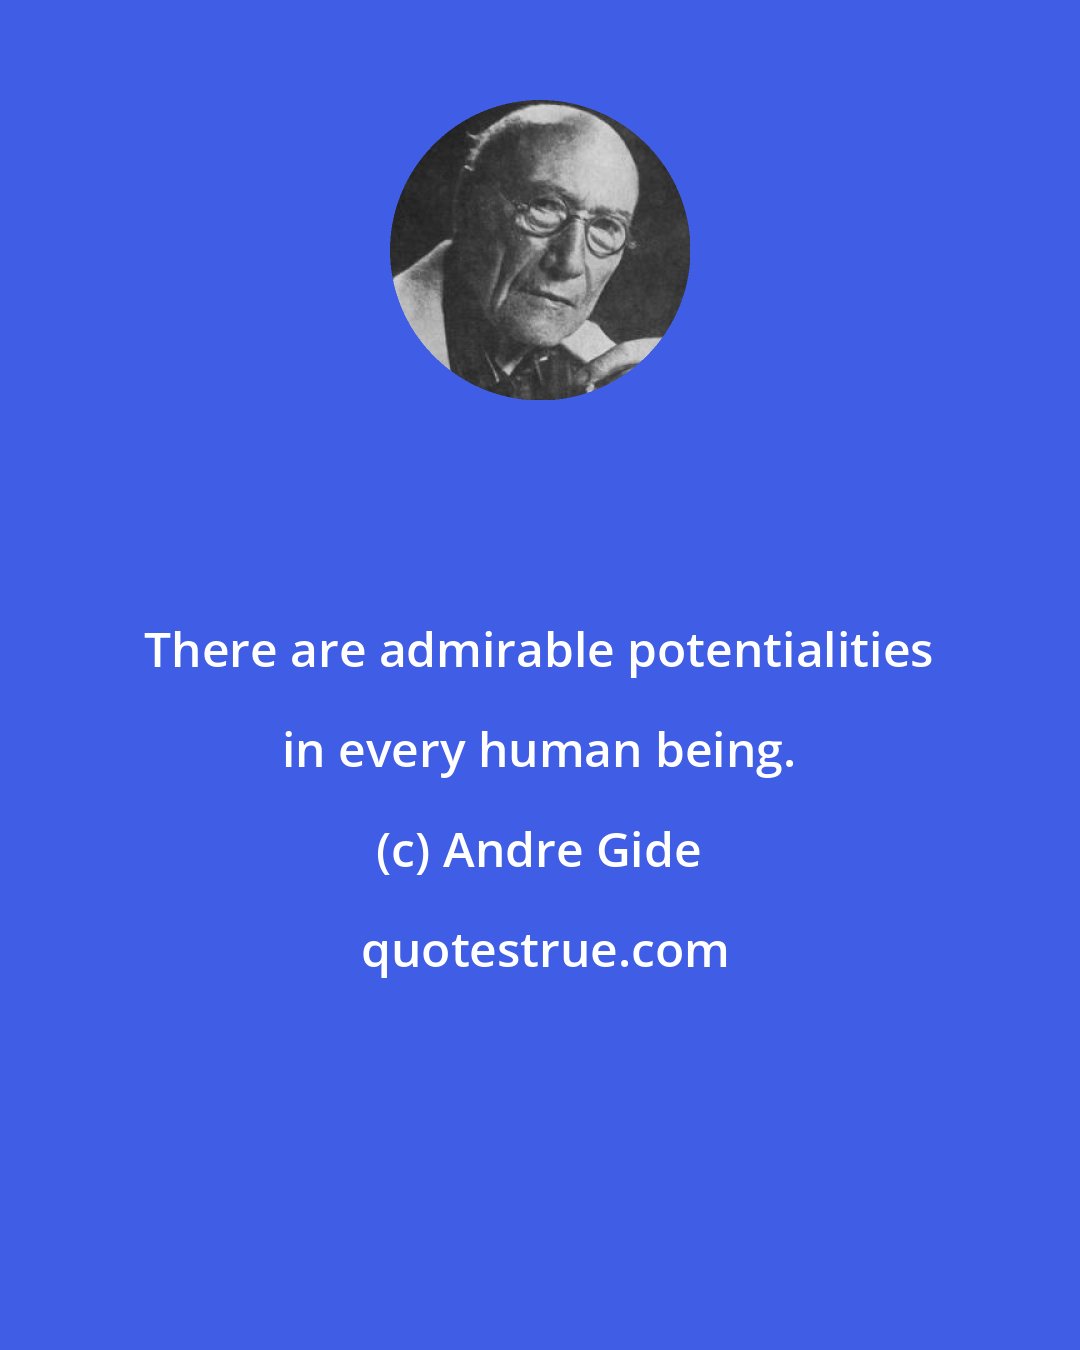 Andre Gide: There are admirable potentialities in every human being.